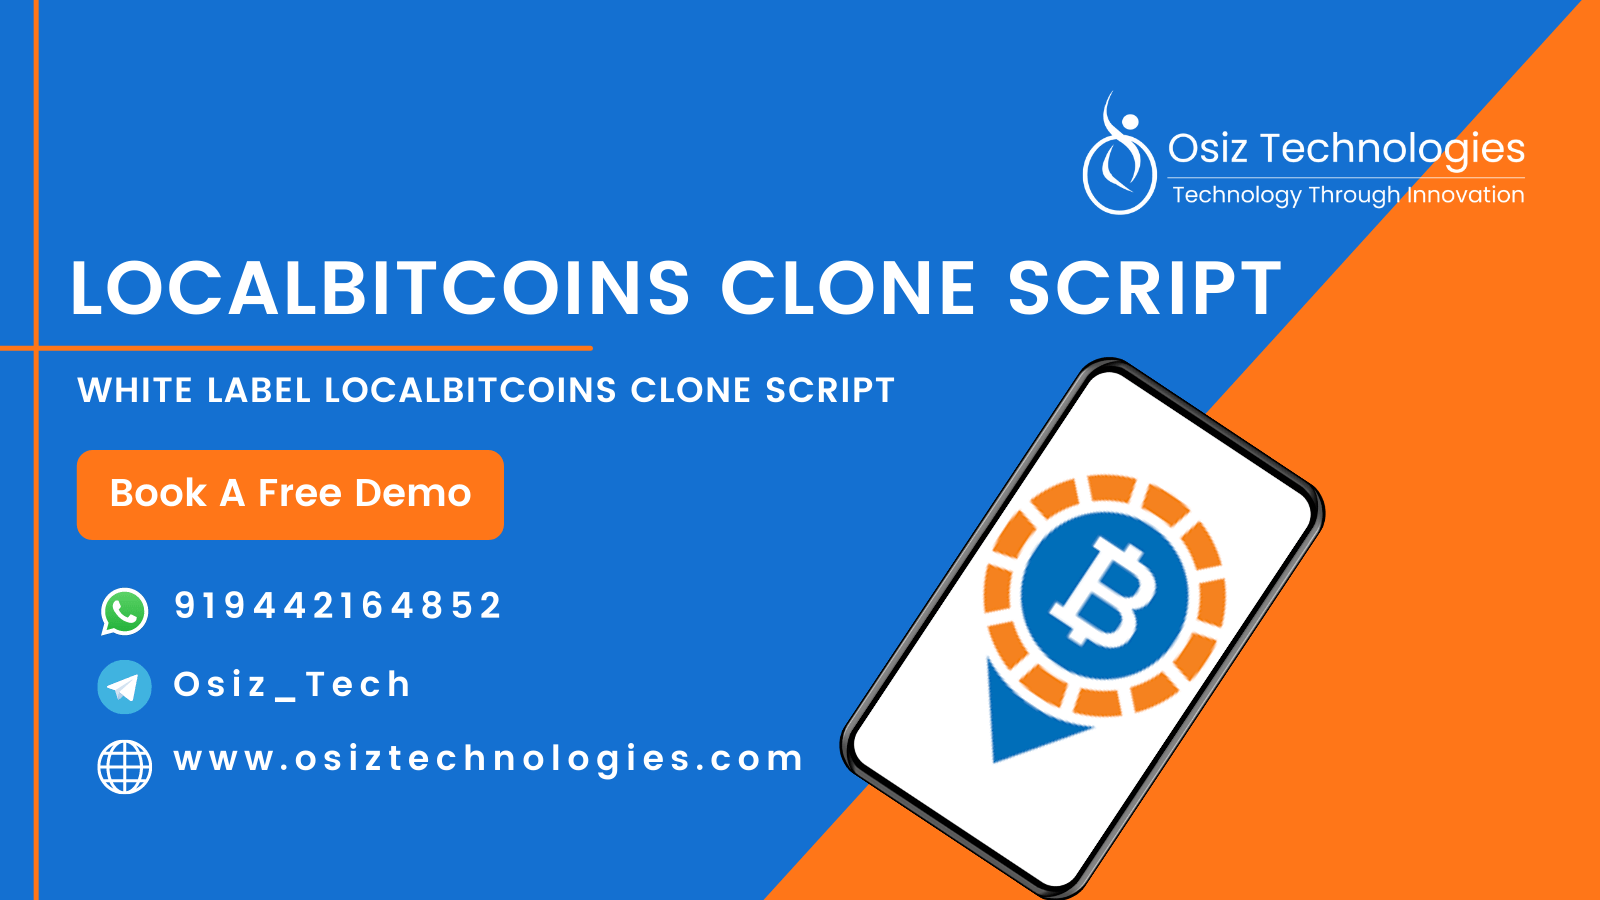 Article about The Simple Steps to Get 100% Customizable Localbitcoins Clone Script